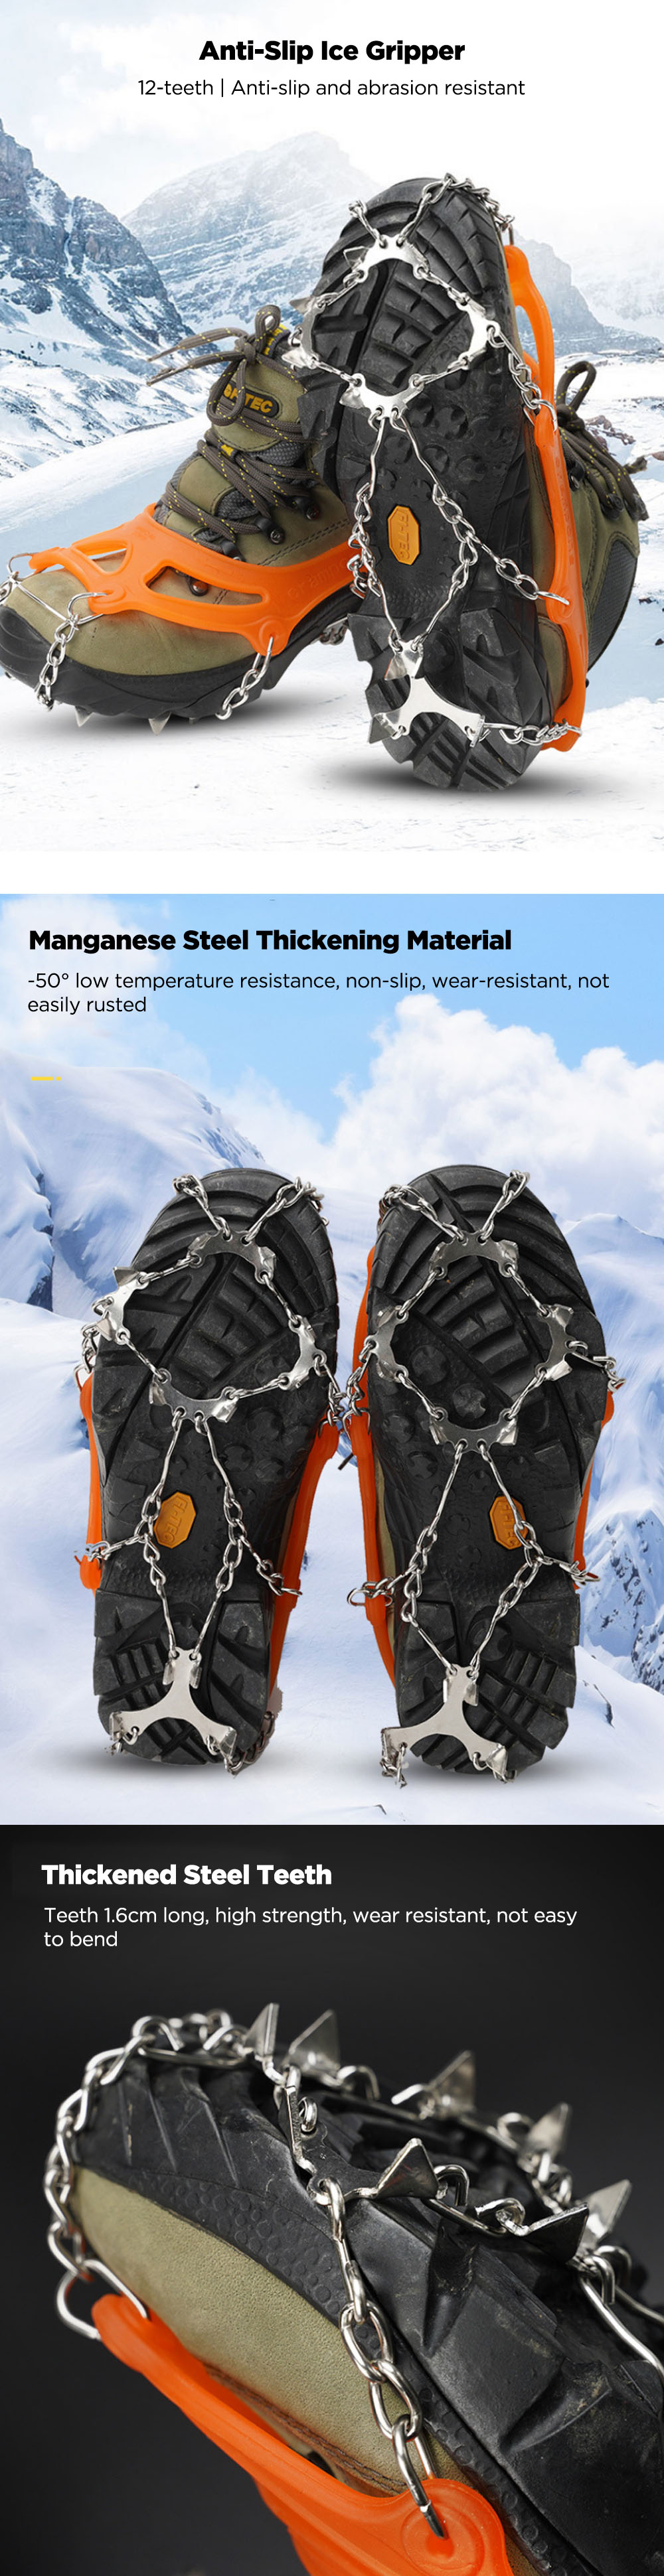 AUTO-12-teeth-Ice-Grip-Stainless-Steel-Welding-Chain-Crampons-Ice-Cleats-Non-slip-Shoe-Cover-for-Cam-1776147-1